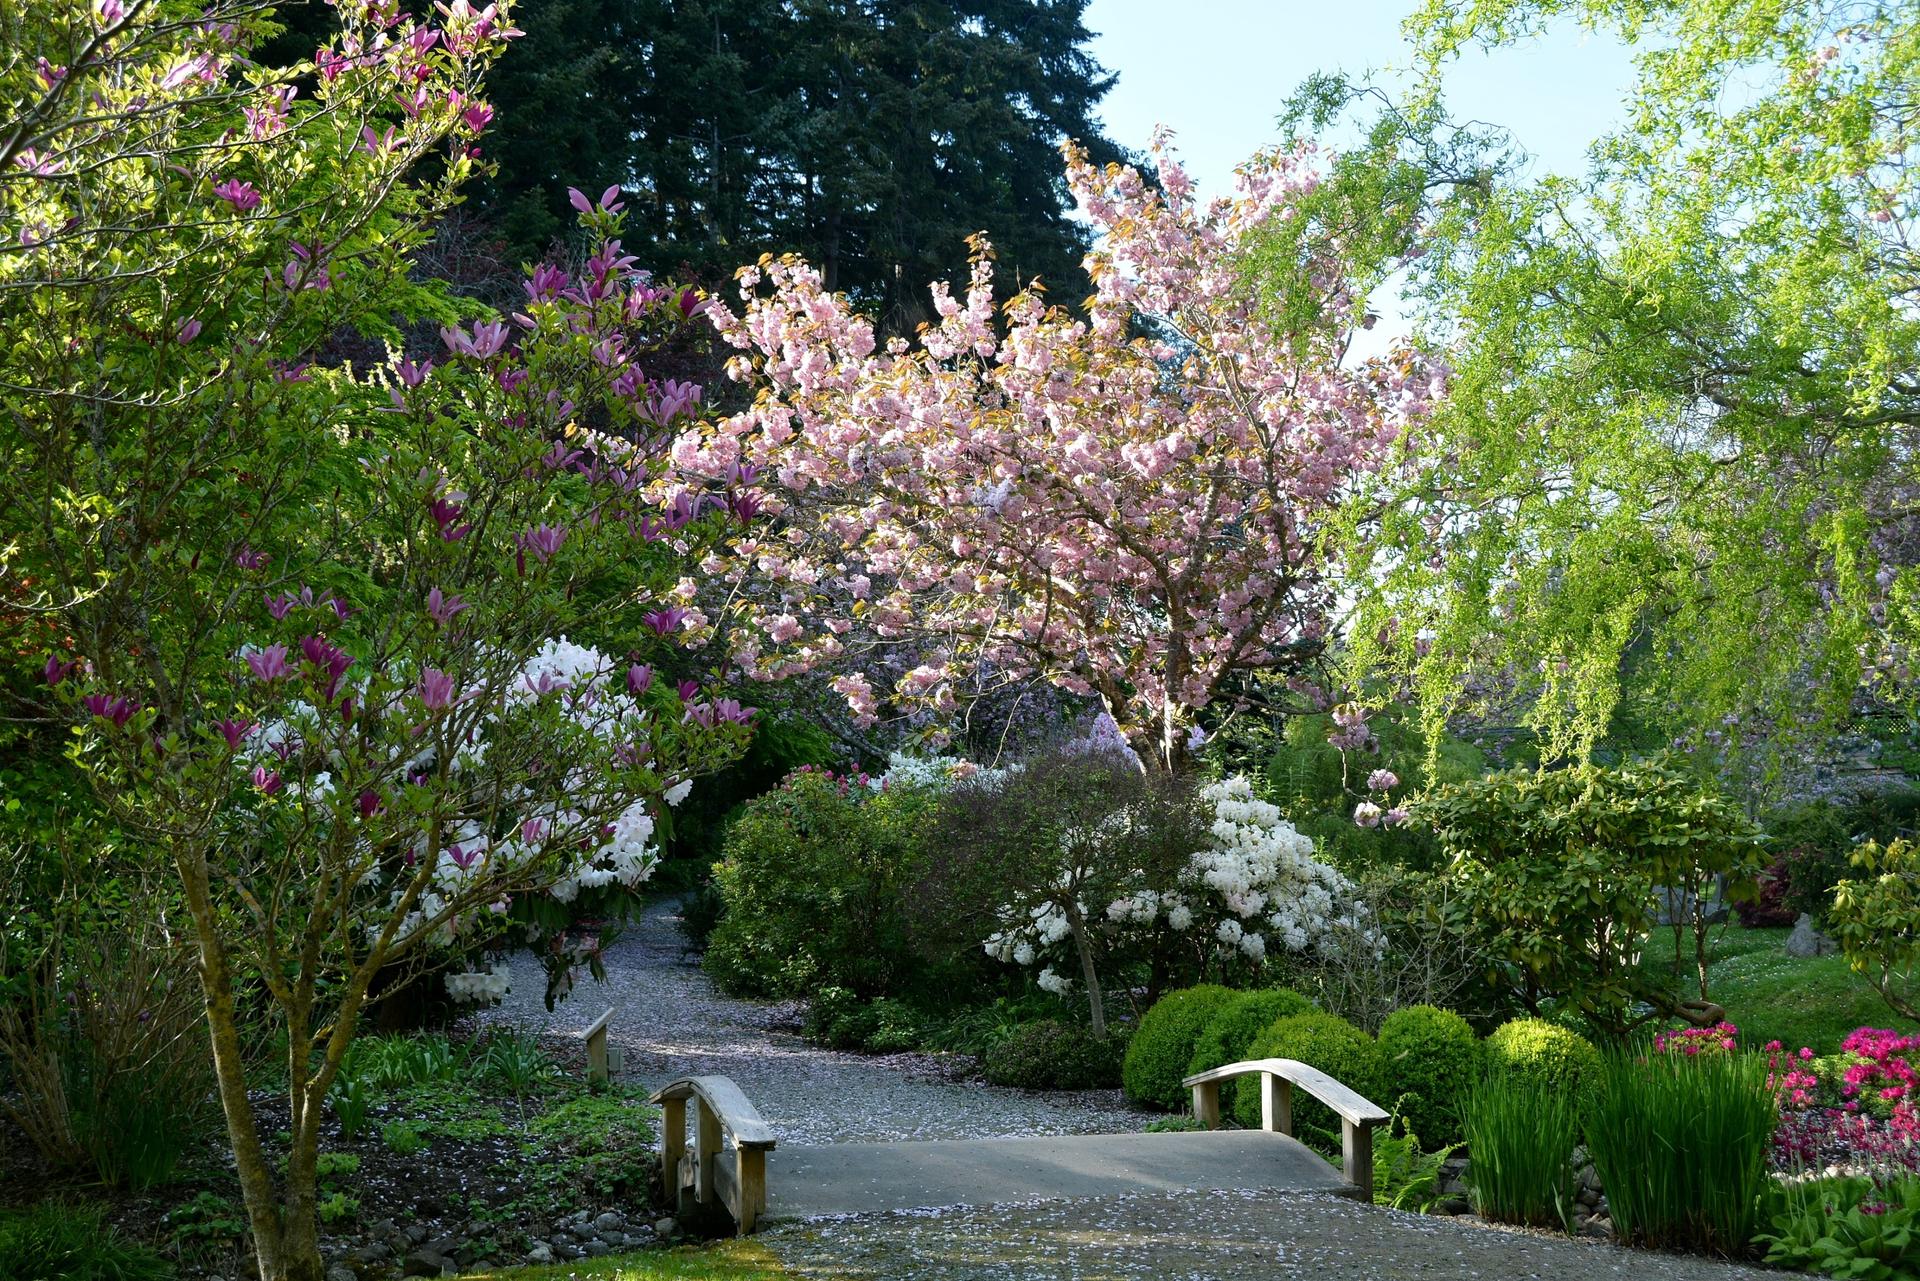 The Japanese Gardens at Dinner Bay Park on Mayne Island.  Photo taken by Lorie Brown.